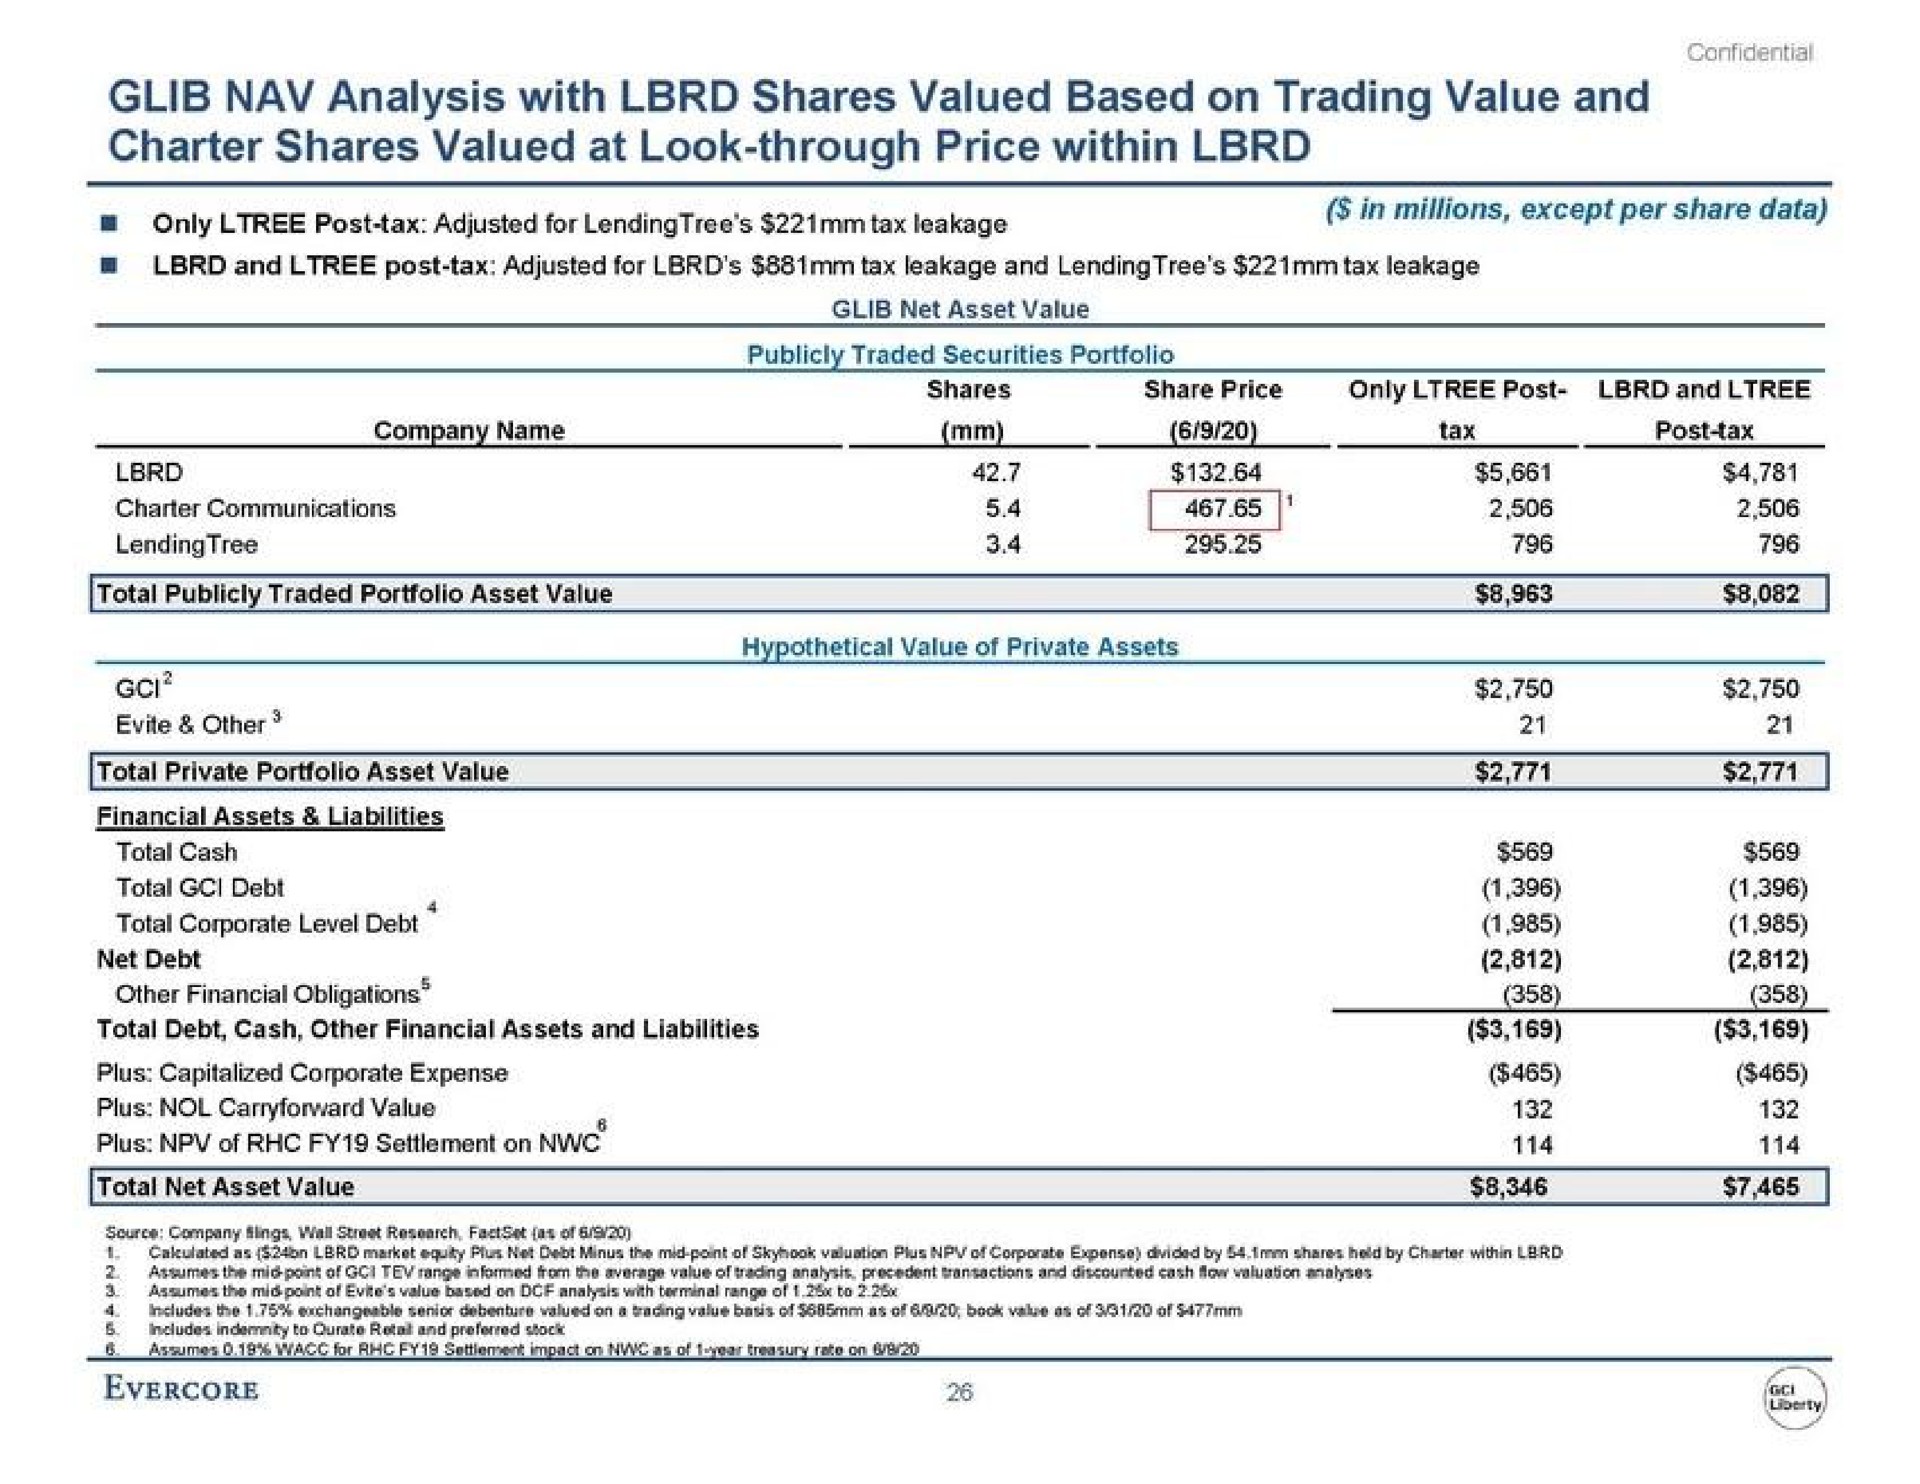 glib analysis with shares valued based on trading value and charter shares valued at look through price within charter communications total net asset value | Evercore